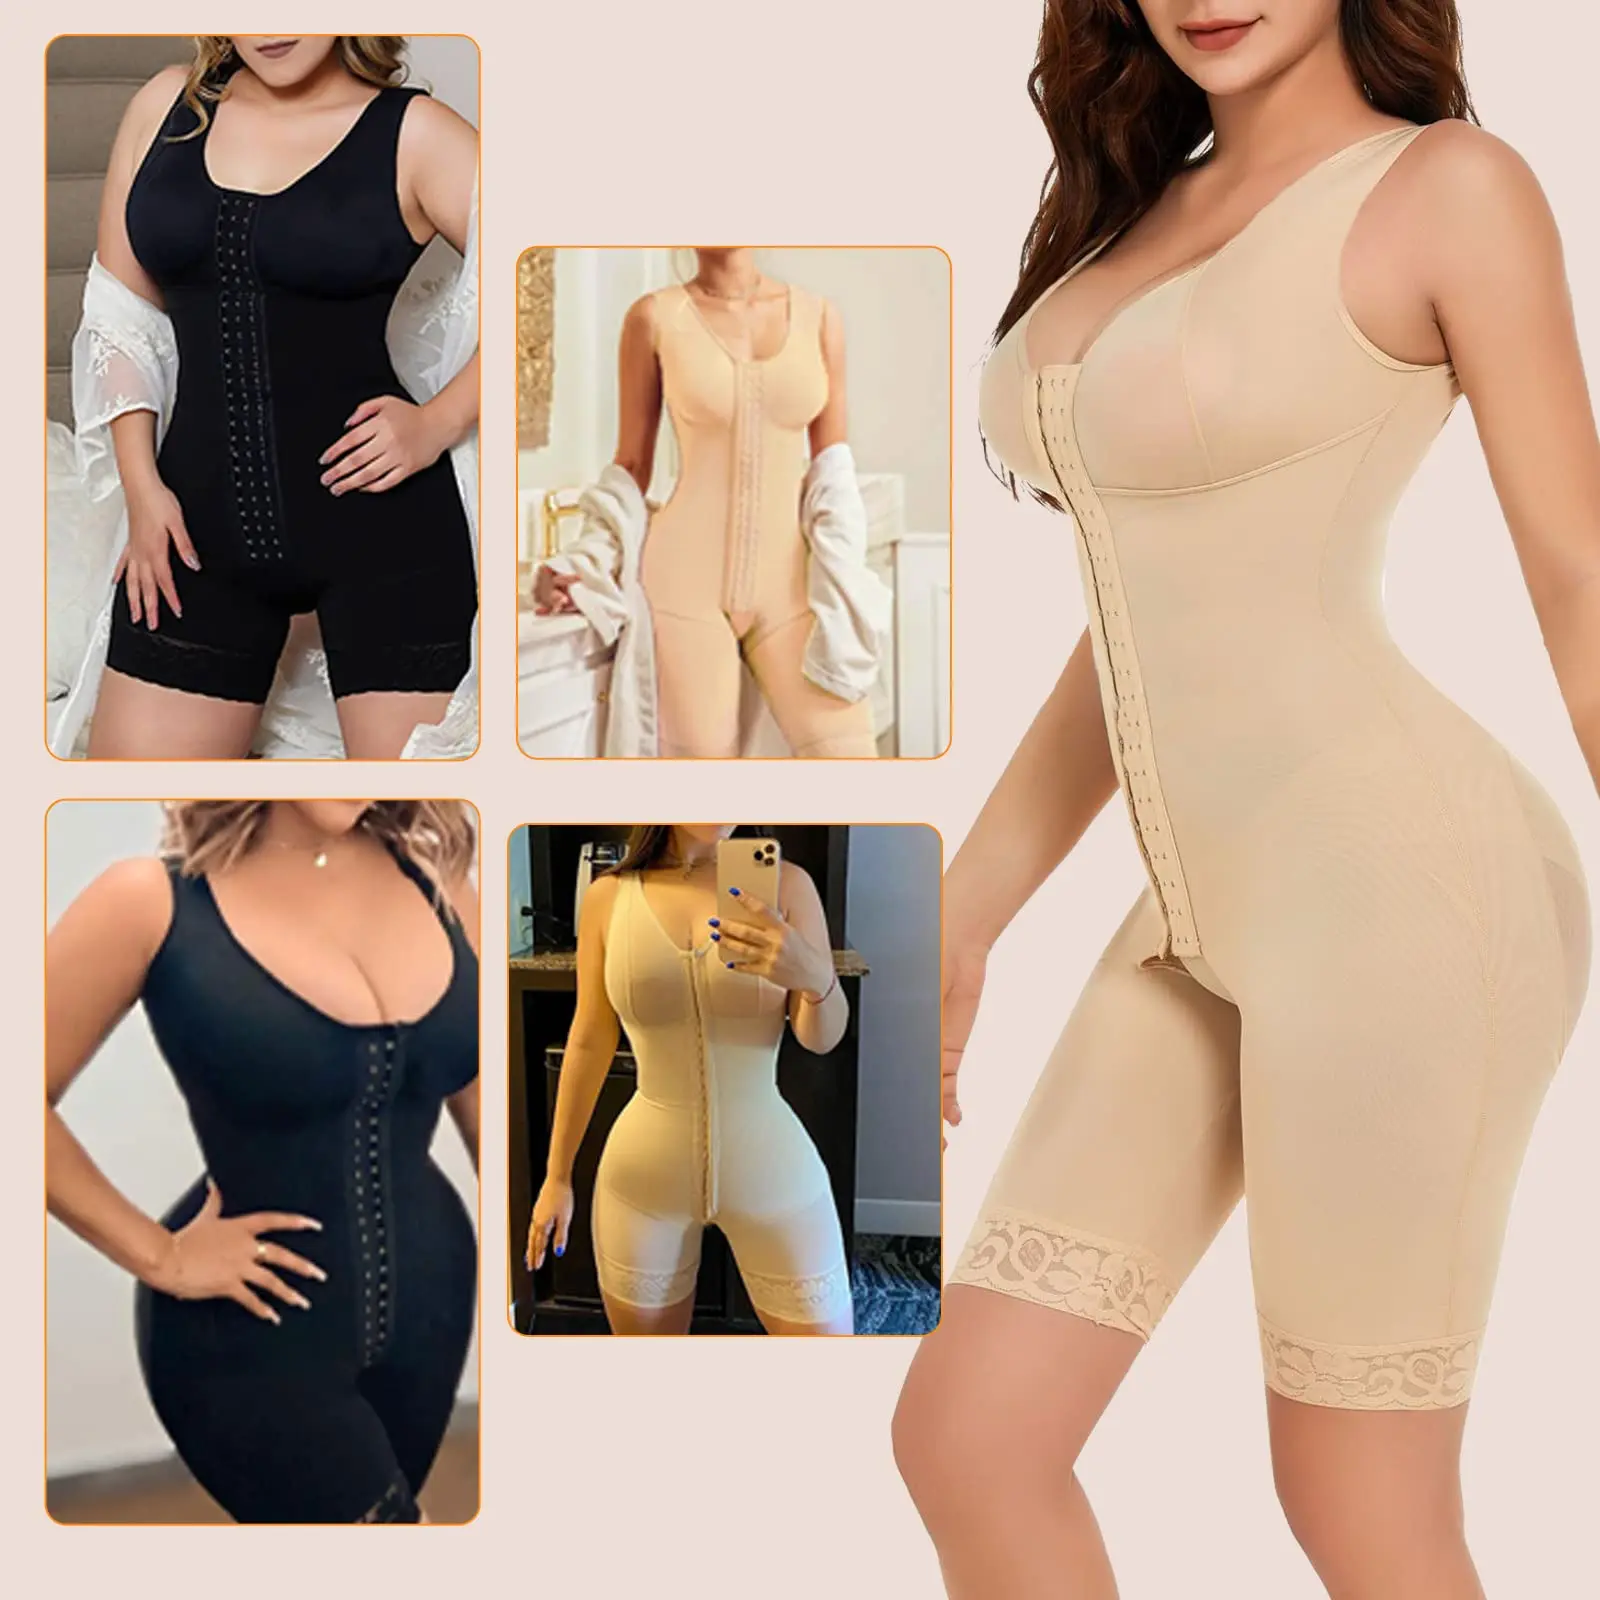 https://ae01.alicdn.com/kf/S18151b6bf92b451691c6f89c880889894/Women-s-High-Double-Compression-Garment-Tummy-Control-Adjustable-BBL-Post-Op-Surgery-Supplie-Fajas-Colombianas.jpg